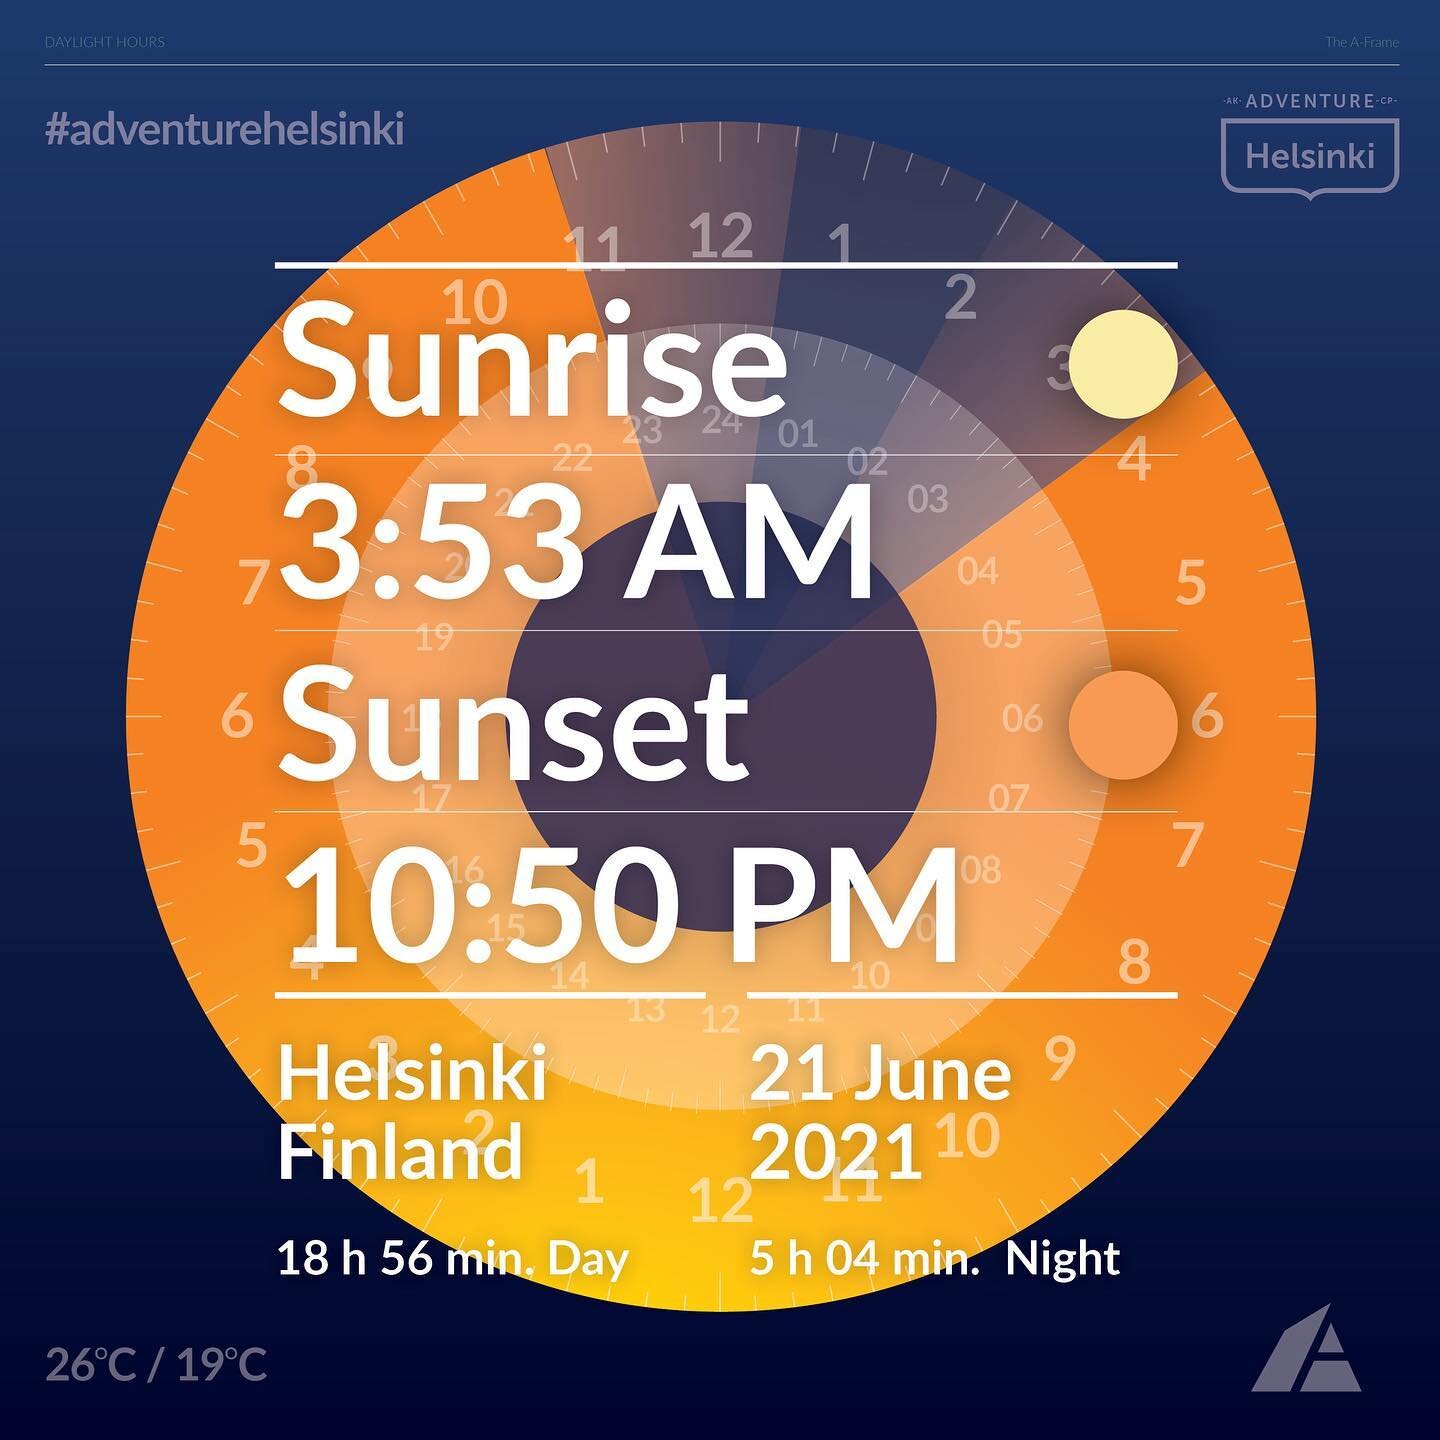 18 hrs 56 mins of daylight!? Doesn&rsquo;t actually get dark before sunrise which is at 3:53am. Amazing to have these summer days that last forever. #daylighthours #adventurehelsinki With @ankosurko 
@christian_papist at The A-Frame
-
-
-
#design #de